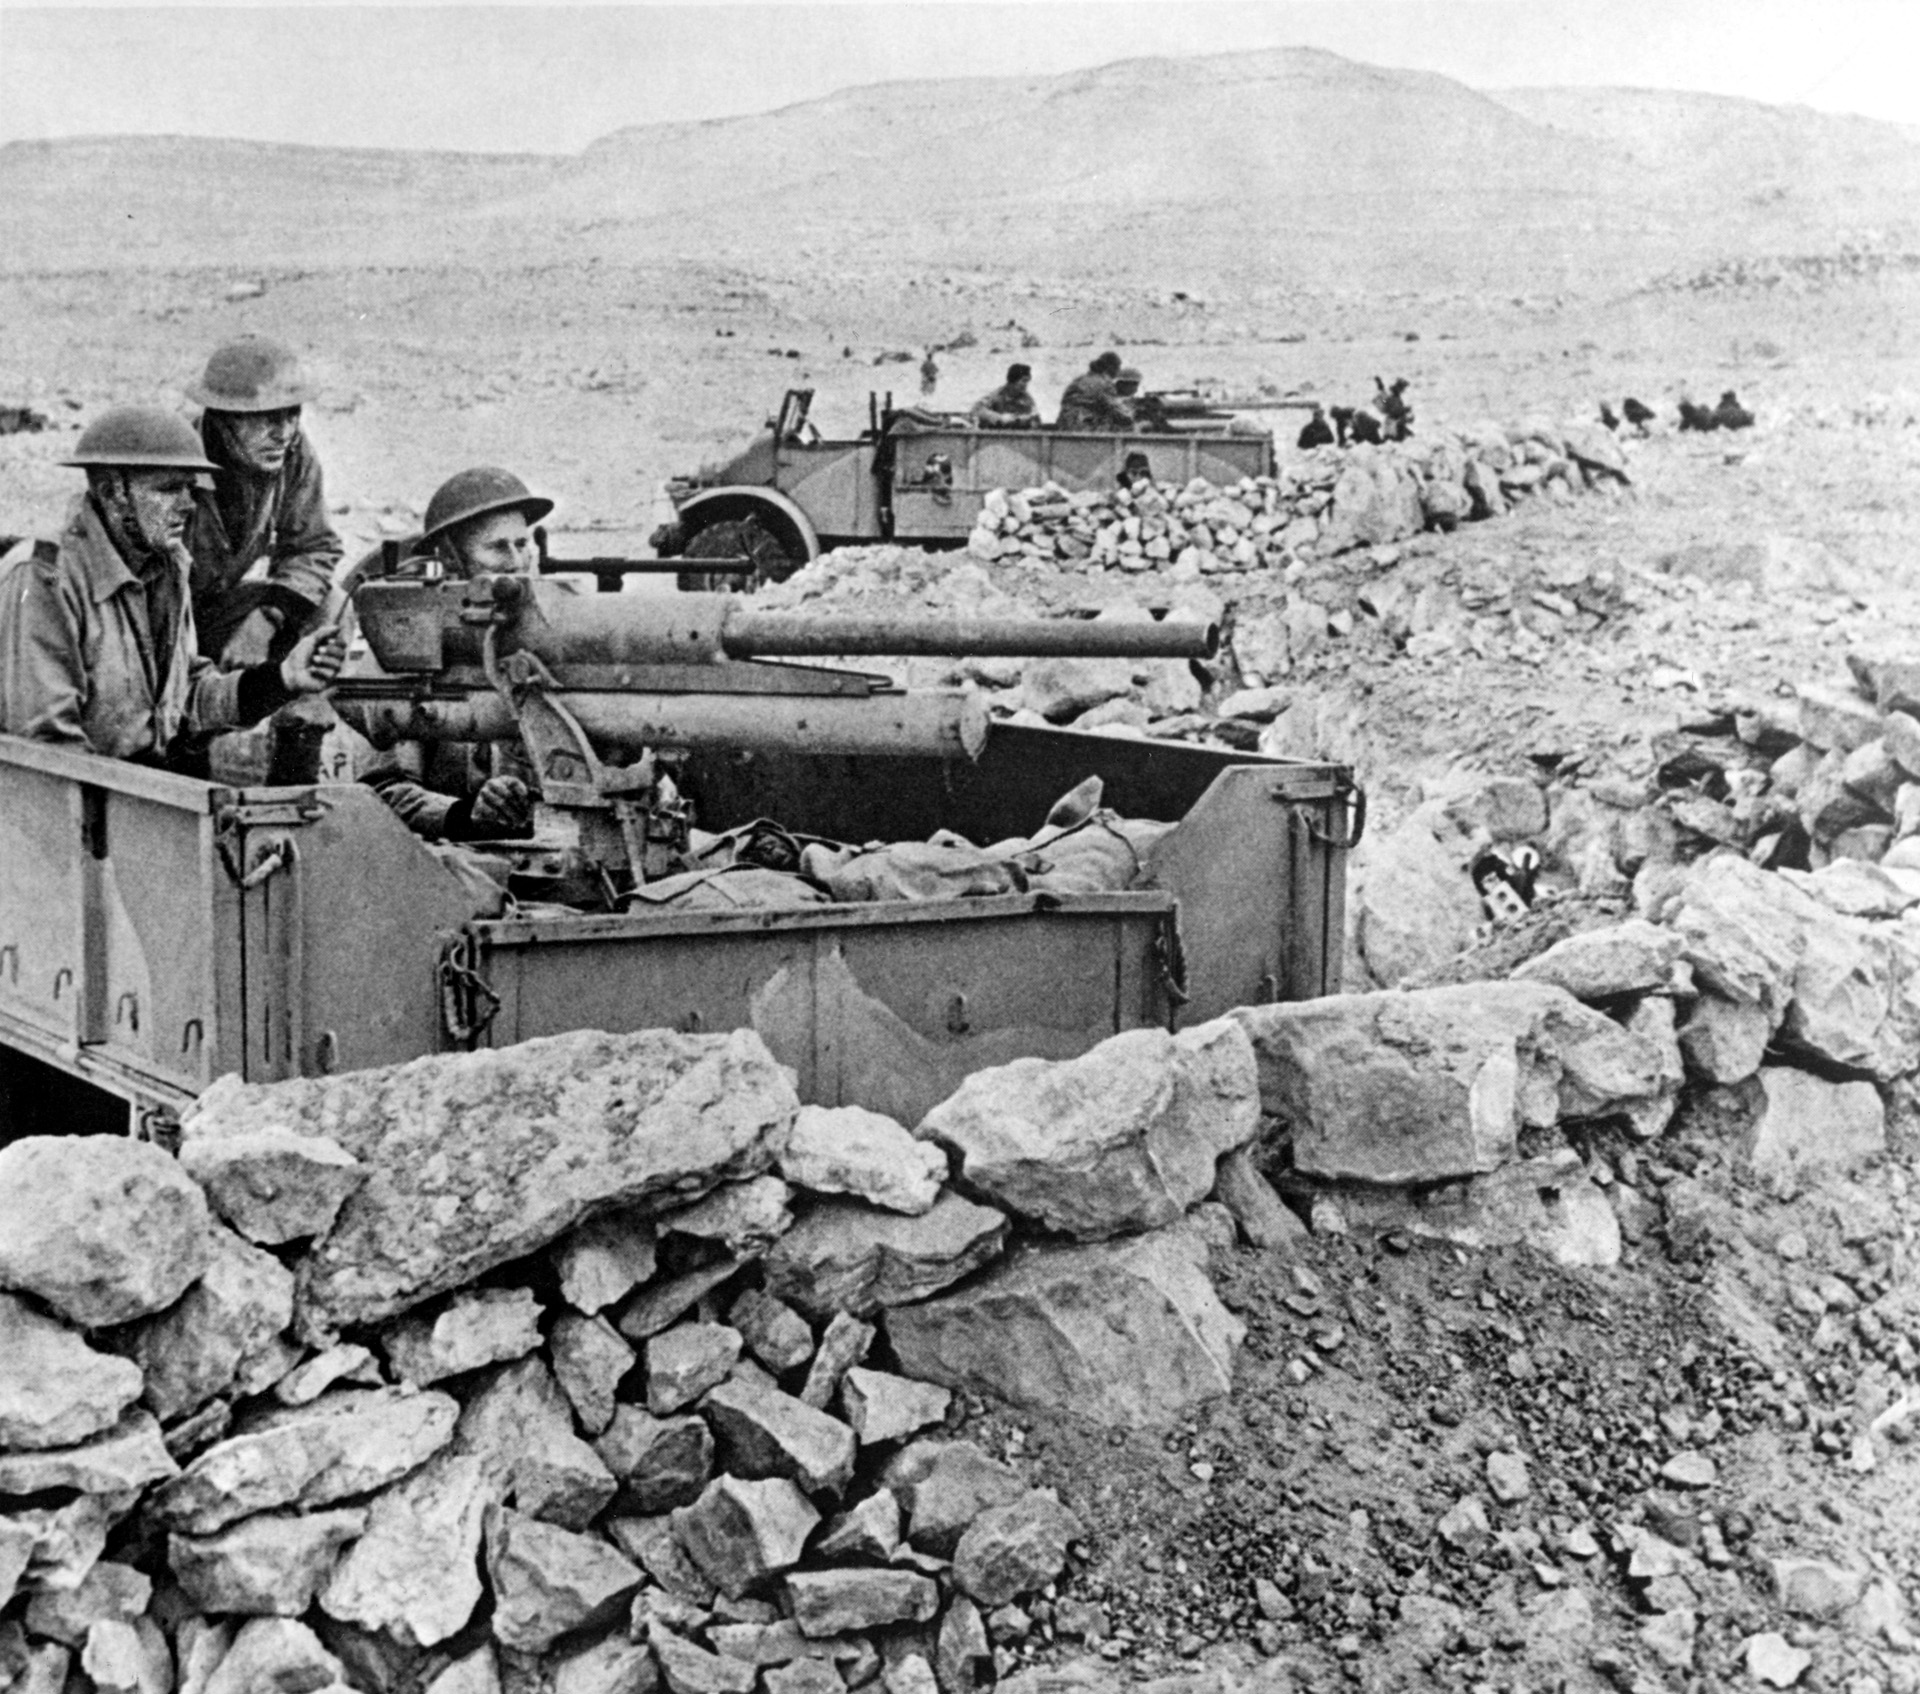 British gunners, protected behind a parapet of stones, prepare to engage Rommel’s panzers with a captured Italian 47mm anti-tank gun.